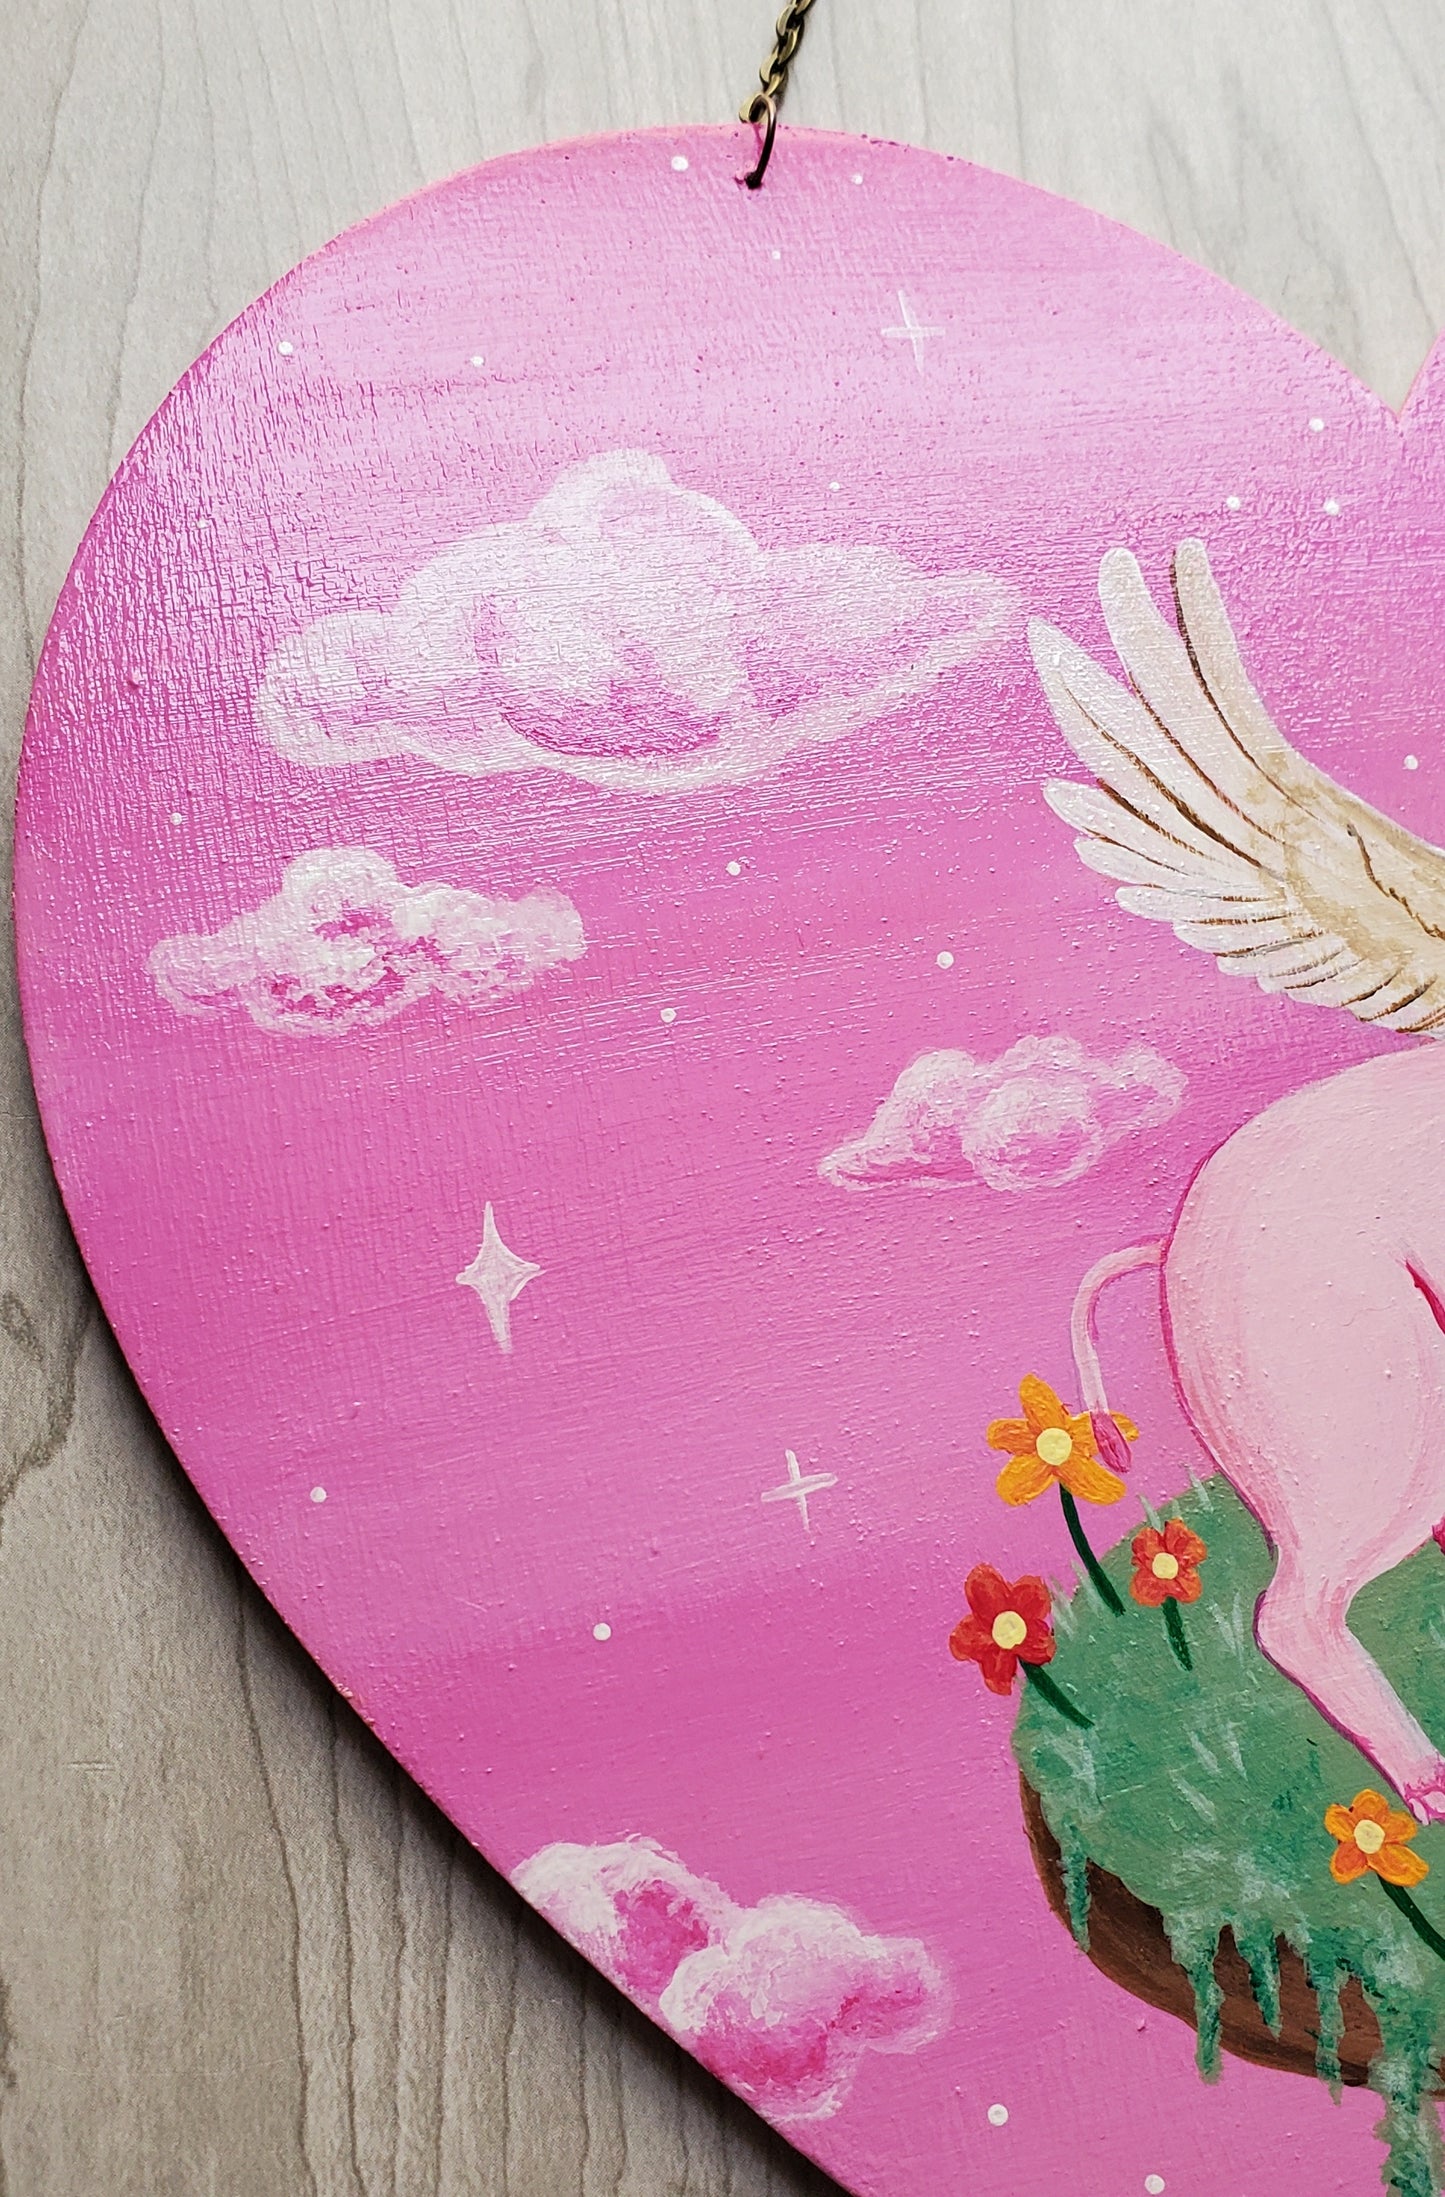 Flying Piggie Painting on Wood